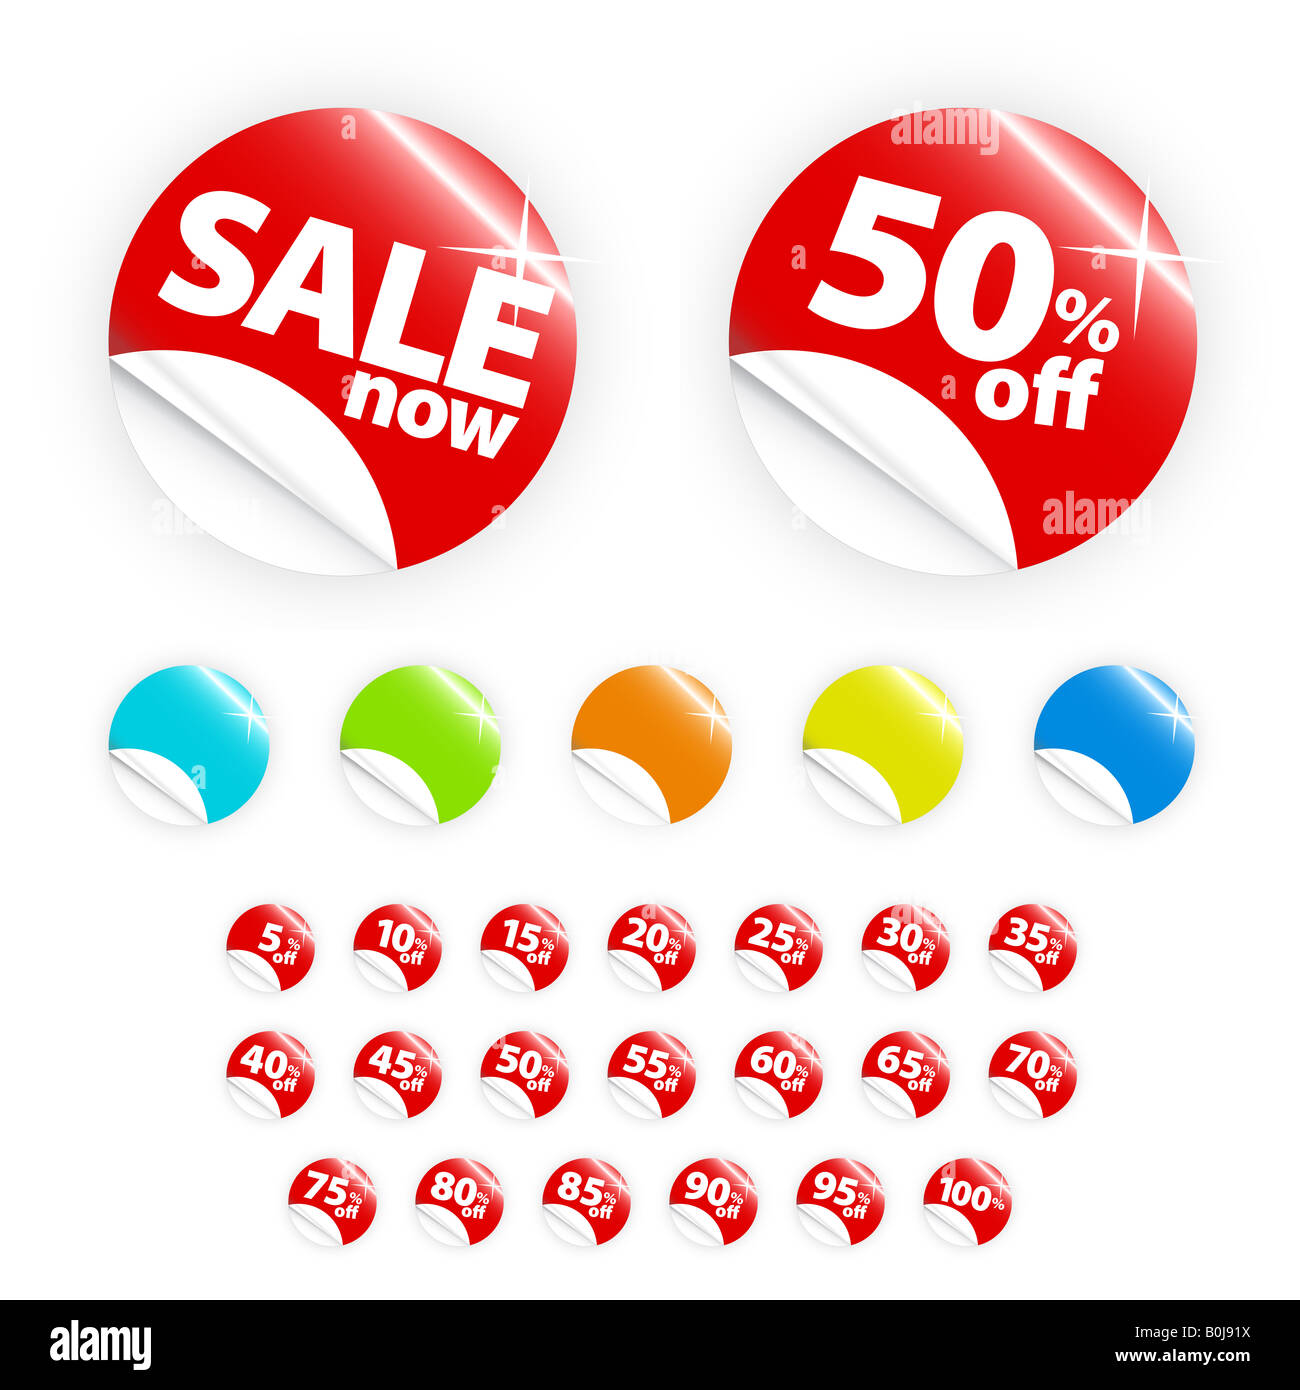 Vector illustrations of glossy shiny retail icons with peel gradient effect with discount percentages from 5 to 100. Stock Photo